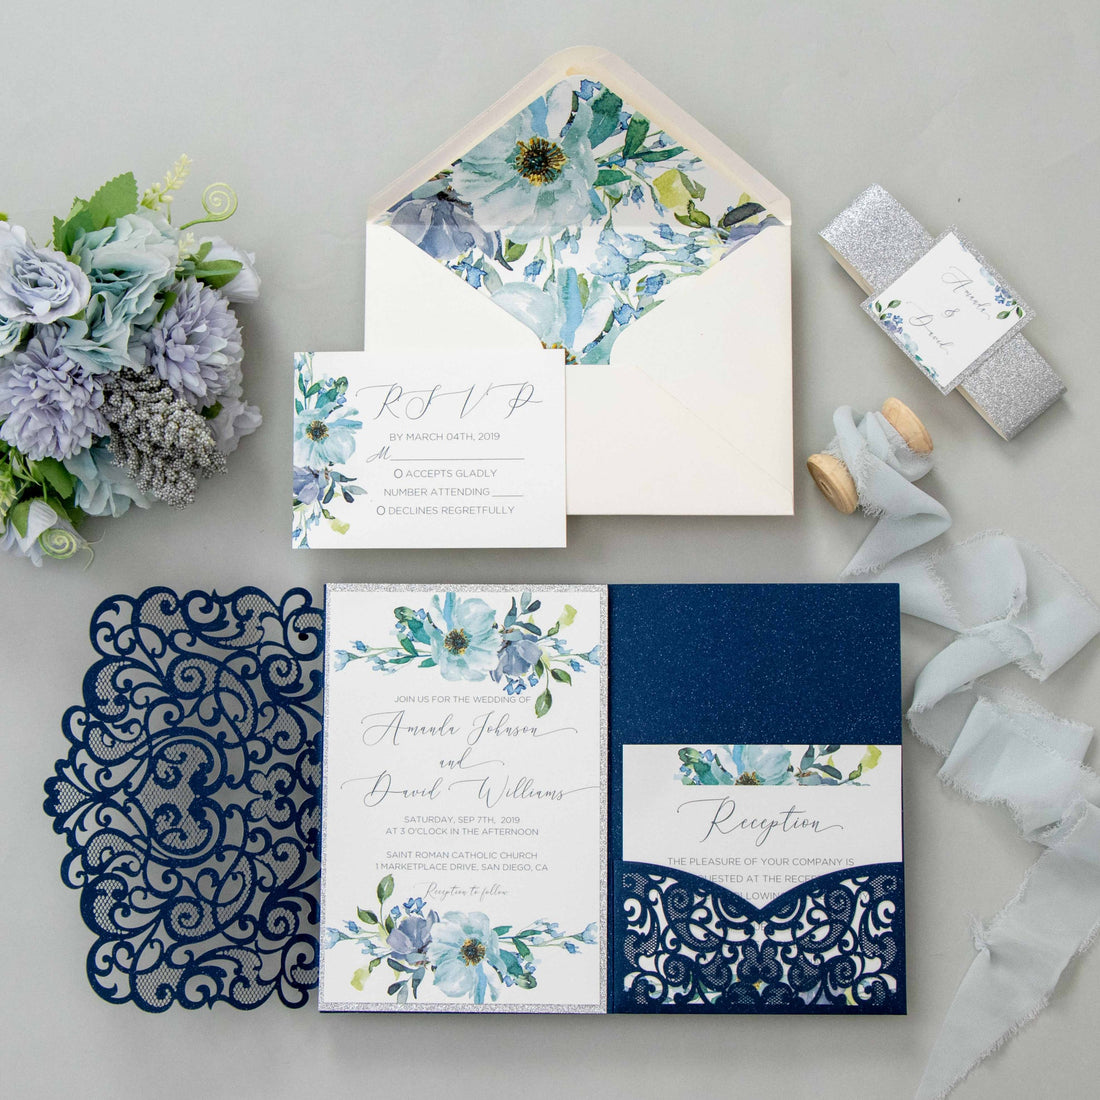 5 ways to make your wedding invitations luxurious!